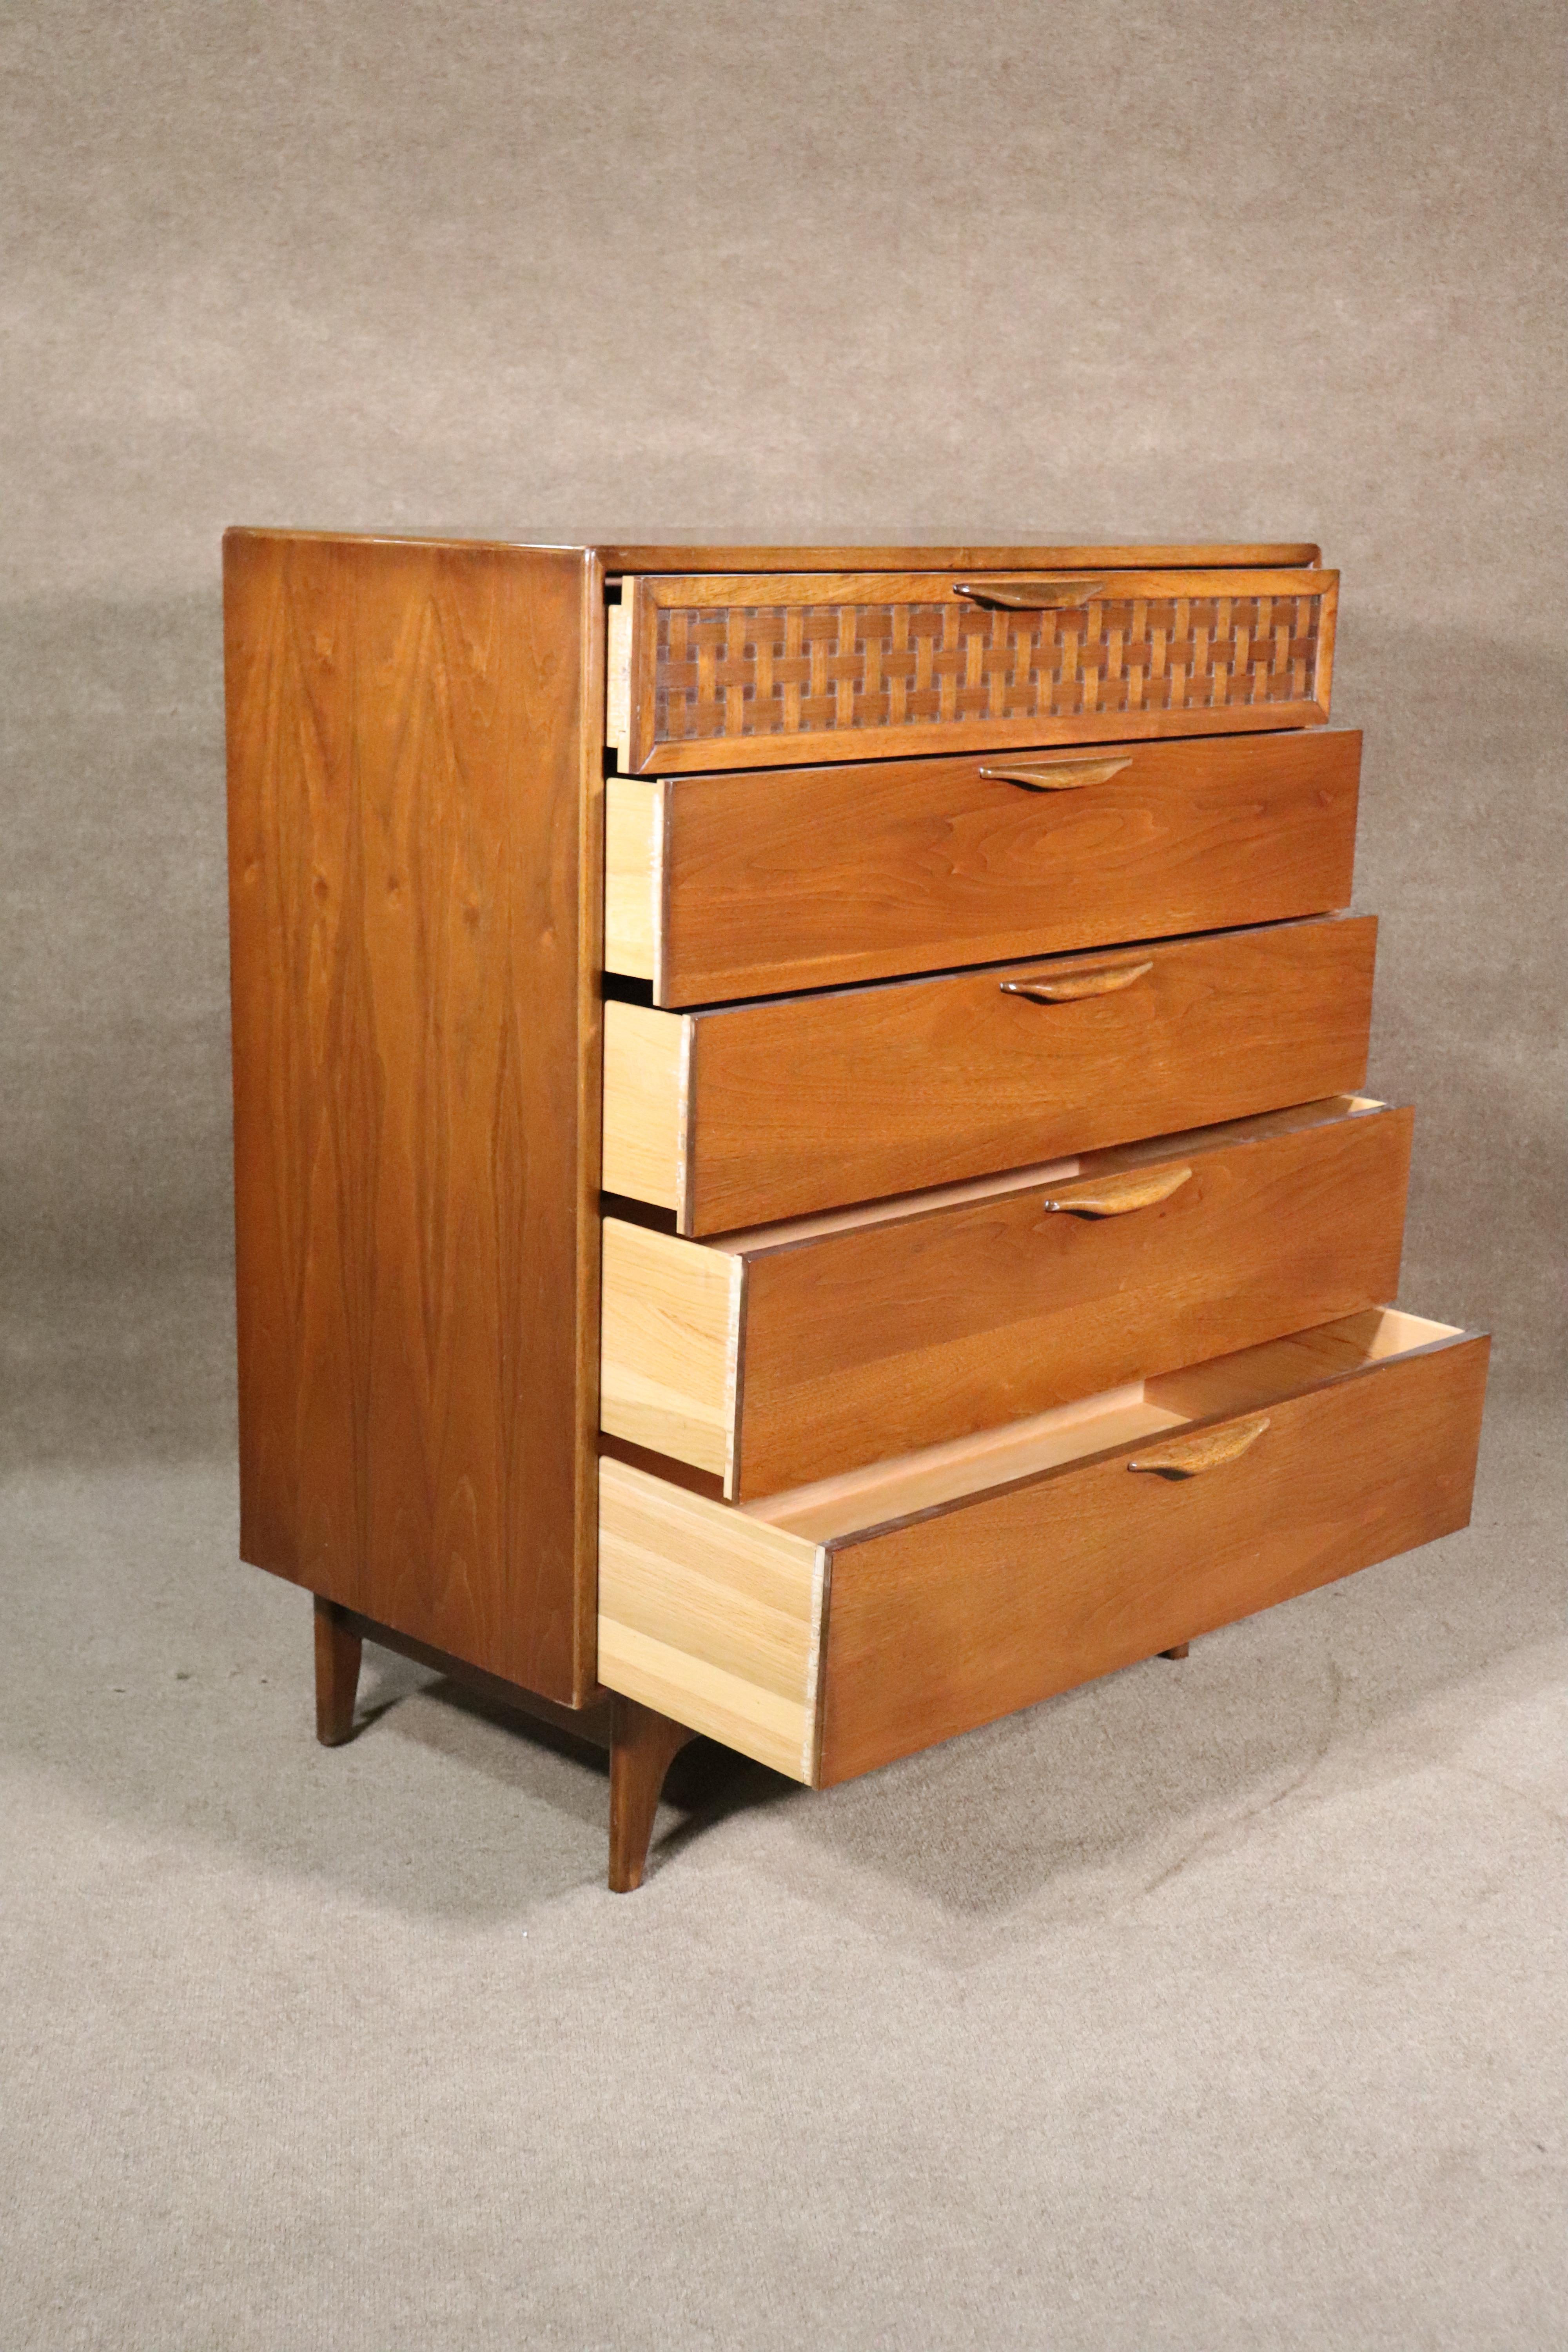 Tall chest of drawers with warm walnut grain and woven front. Designed by Warren Church for his 